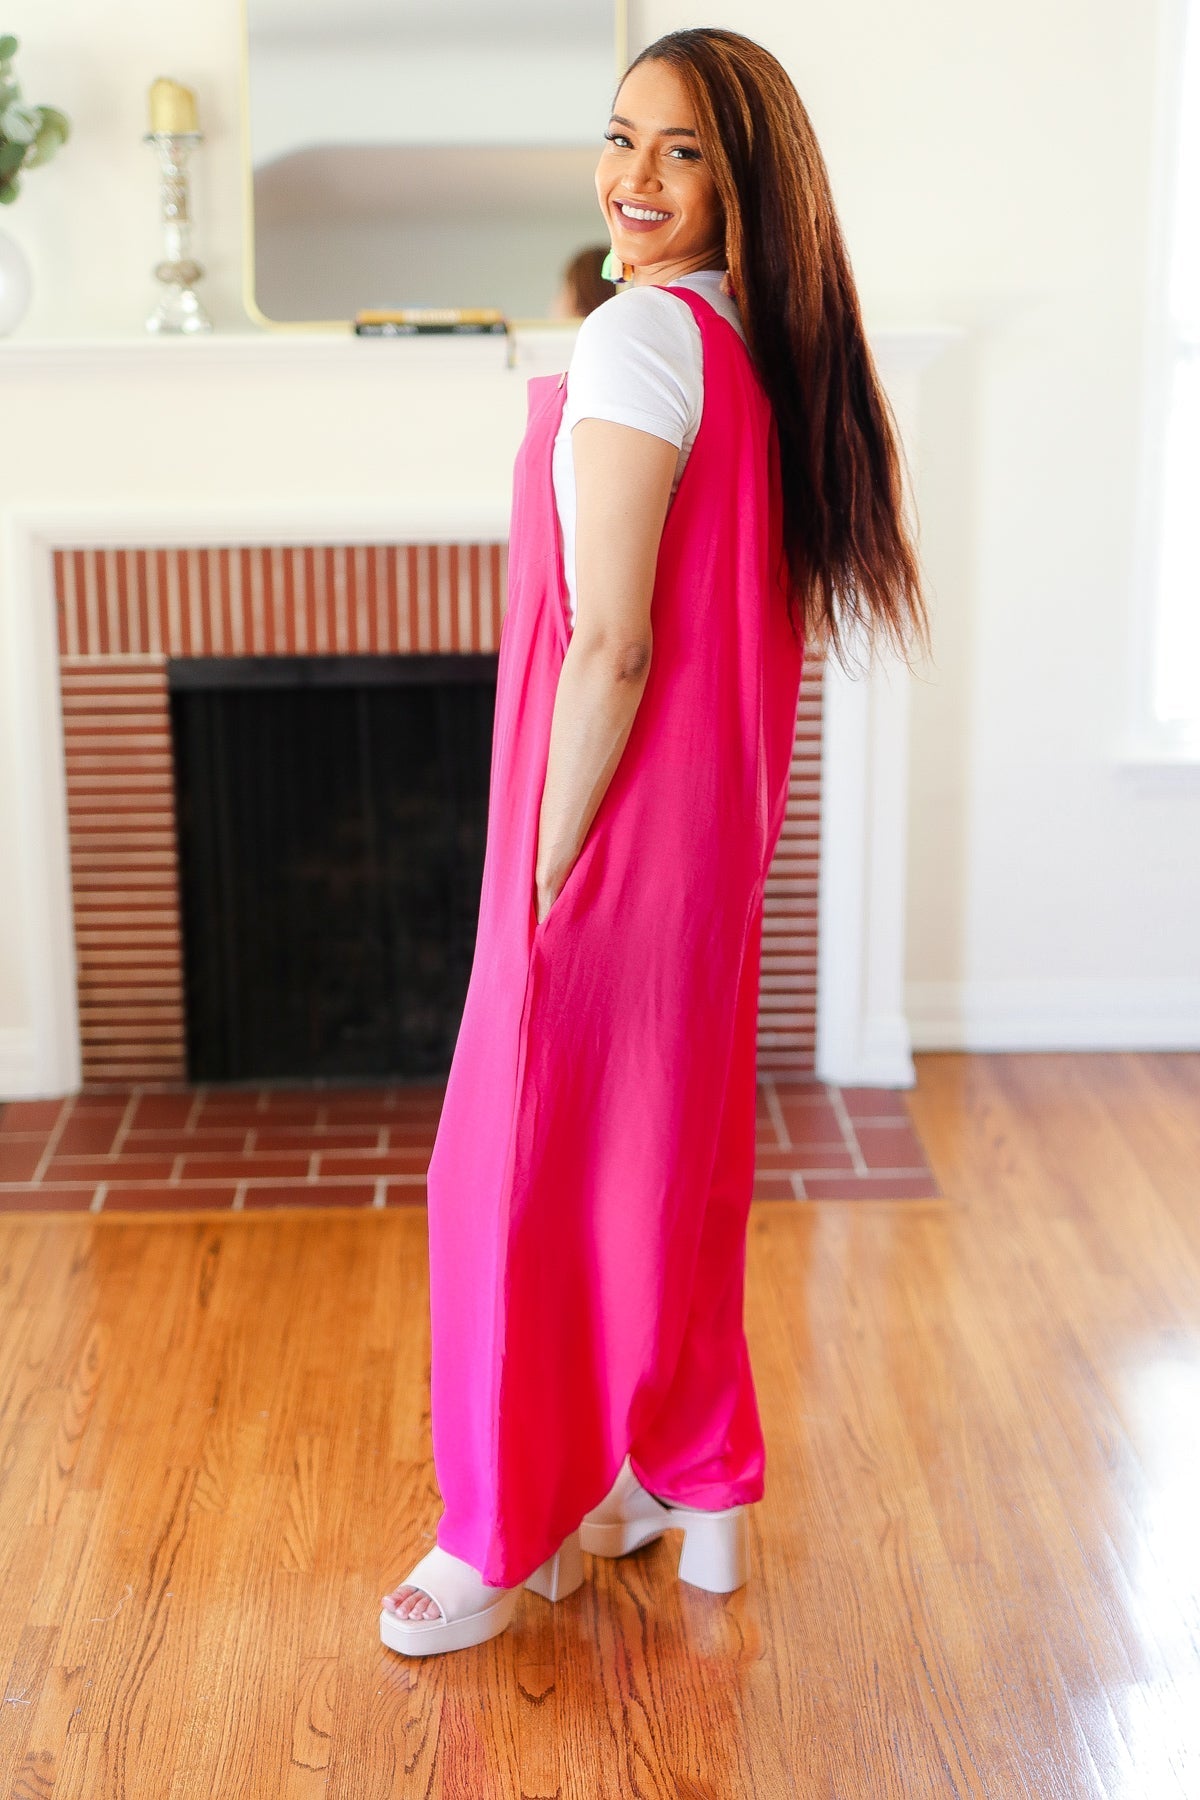 Summer Dreaming Pink Wide Leg Suspender Overall Jumpsuit (Shipping in 1-2 Weeks)